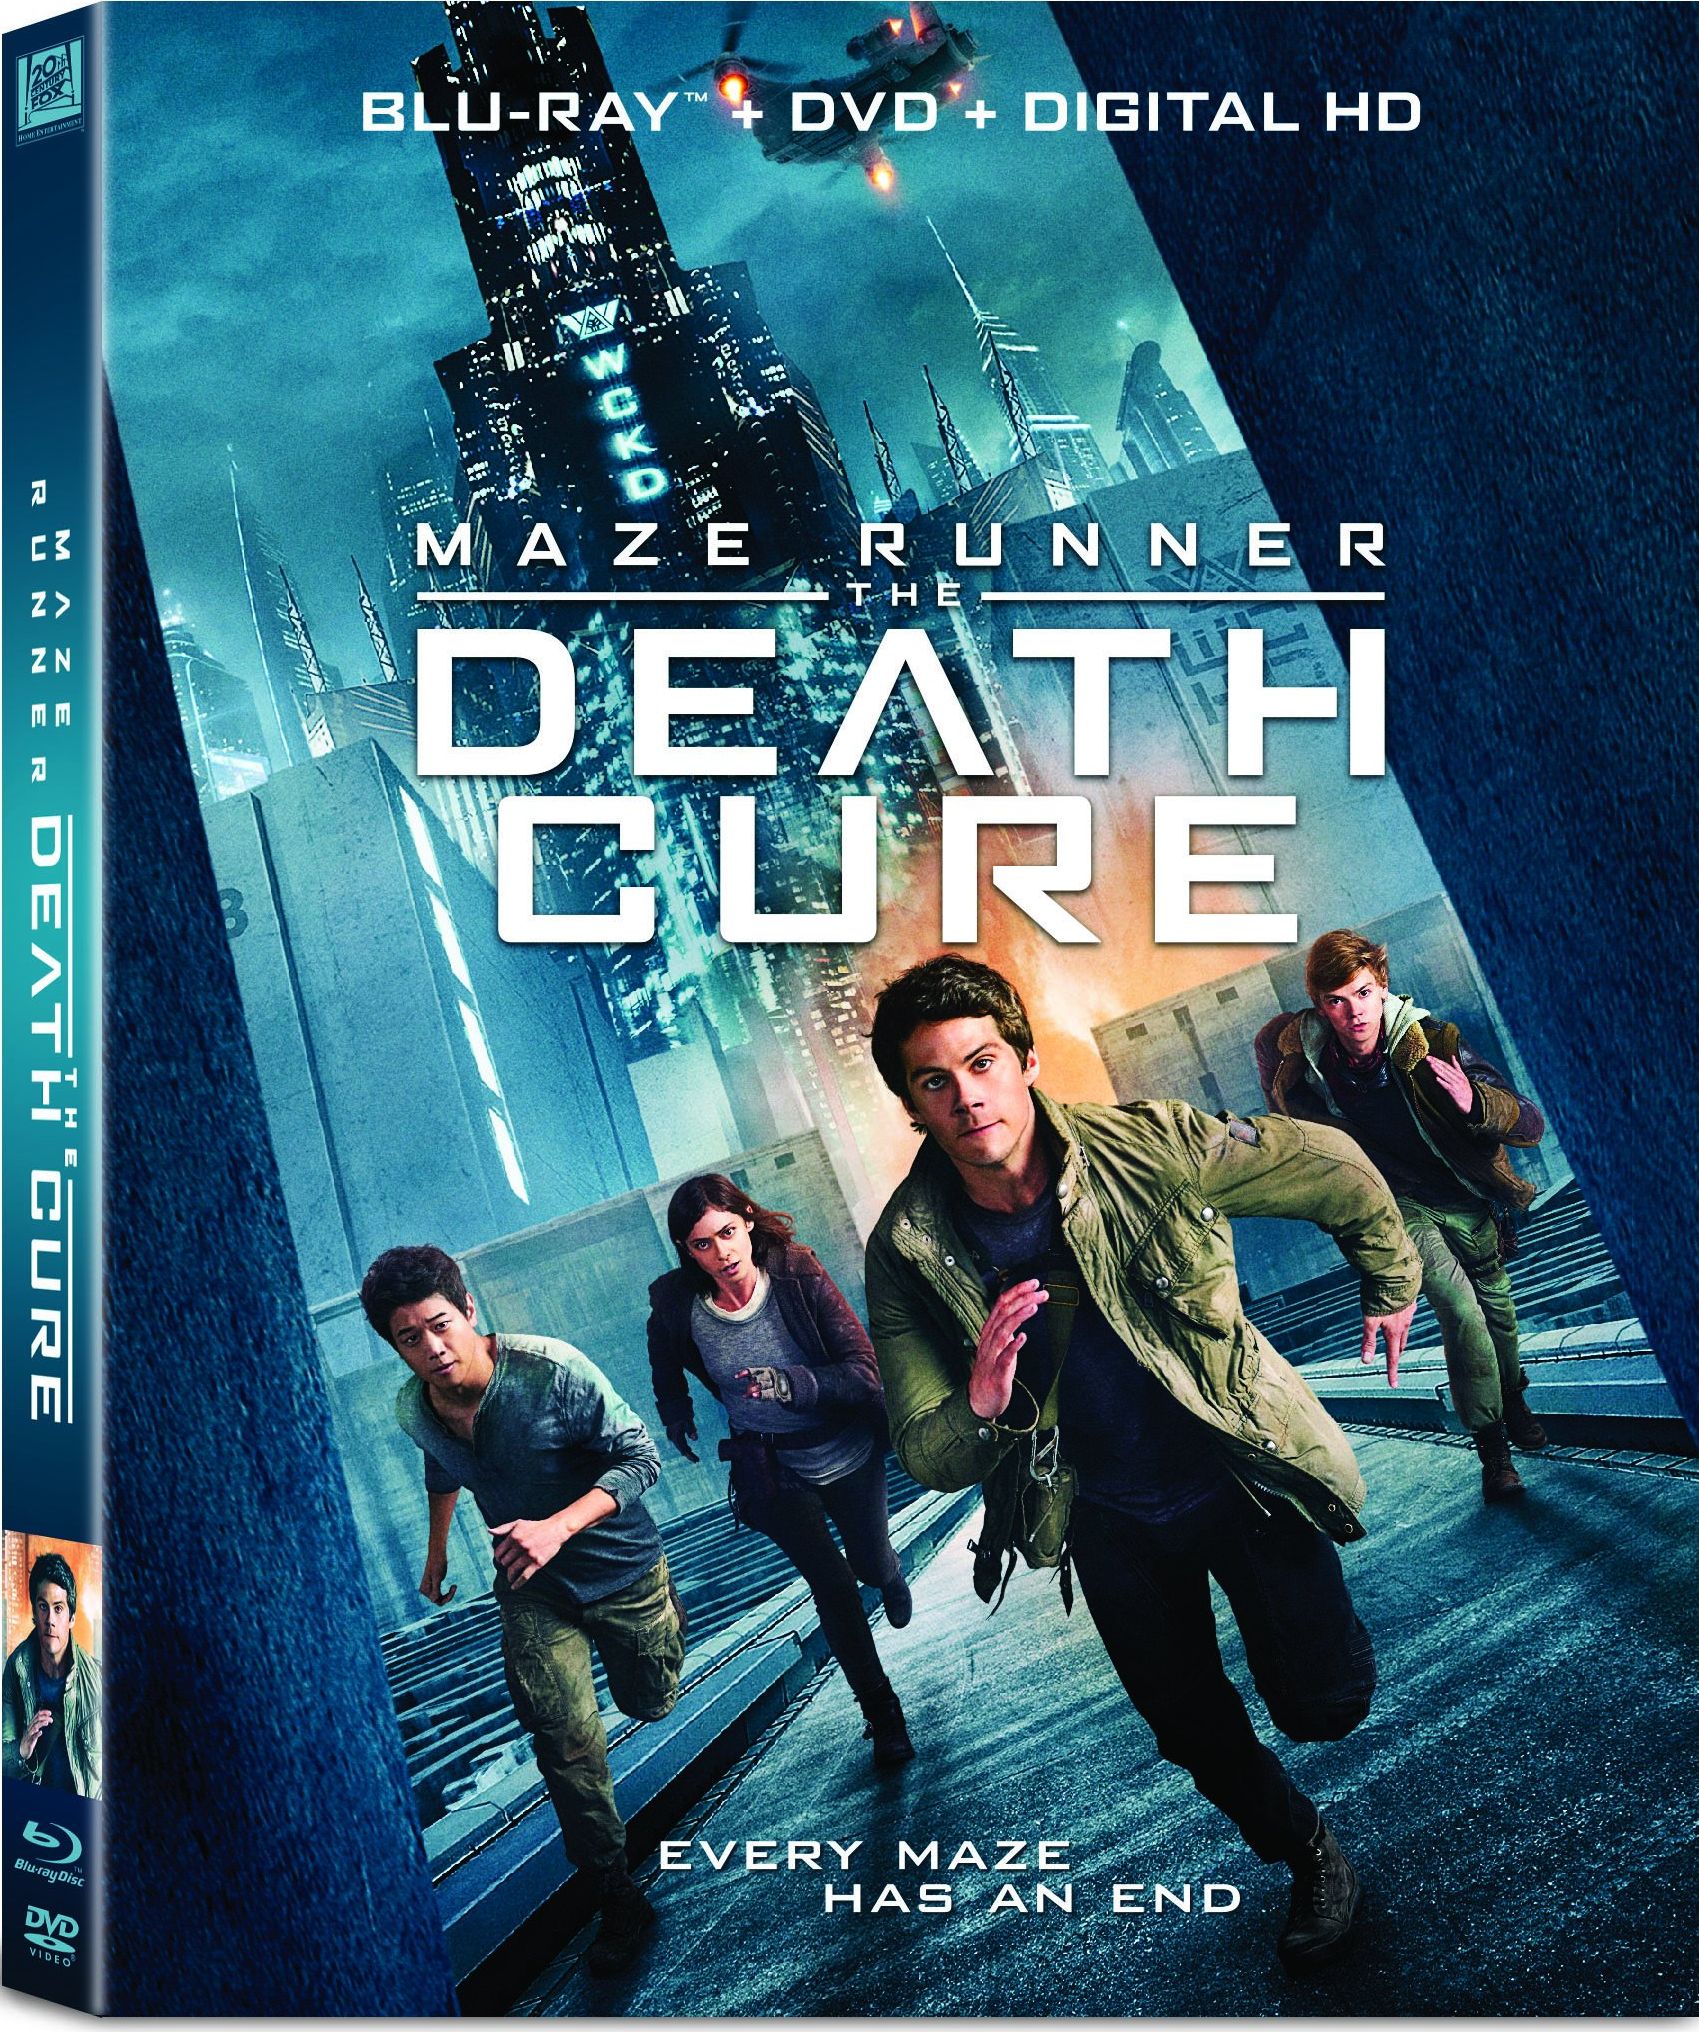 Maze Runner: The Death Cure DVD Release Date April 24, 20181699 x 2032